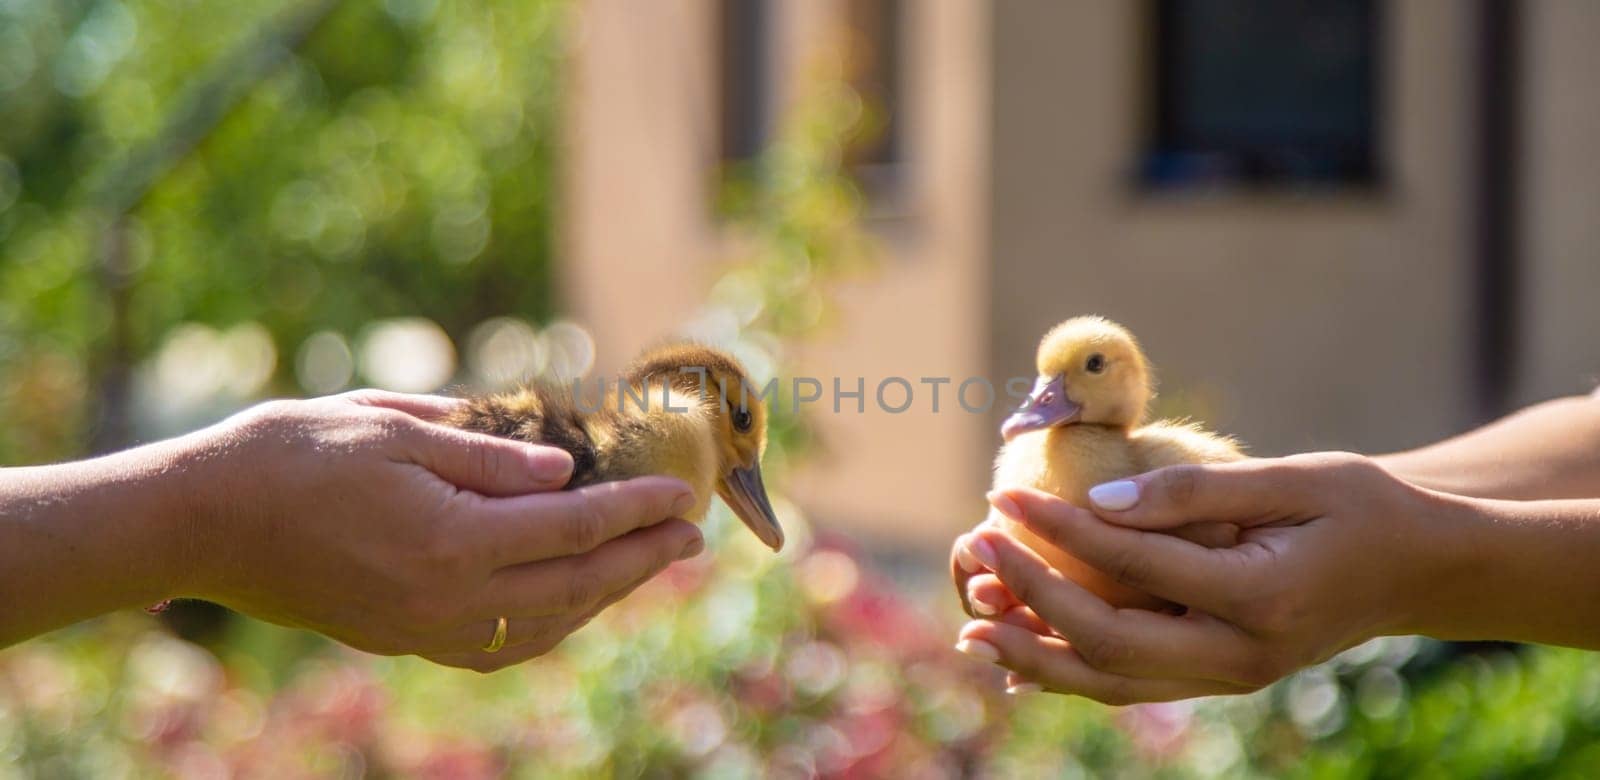 The farmers are holding two ducklings in their hands. Selective focus by Anuta23